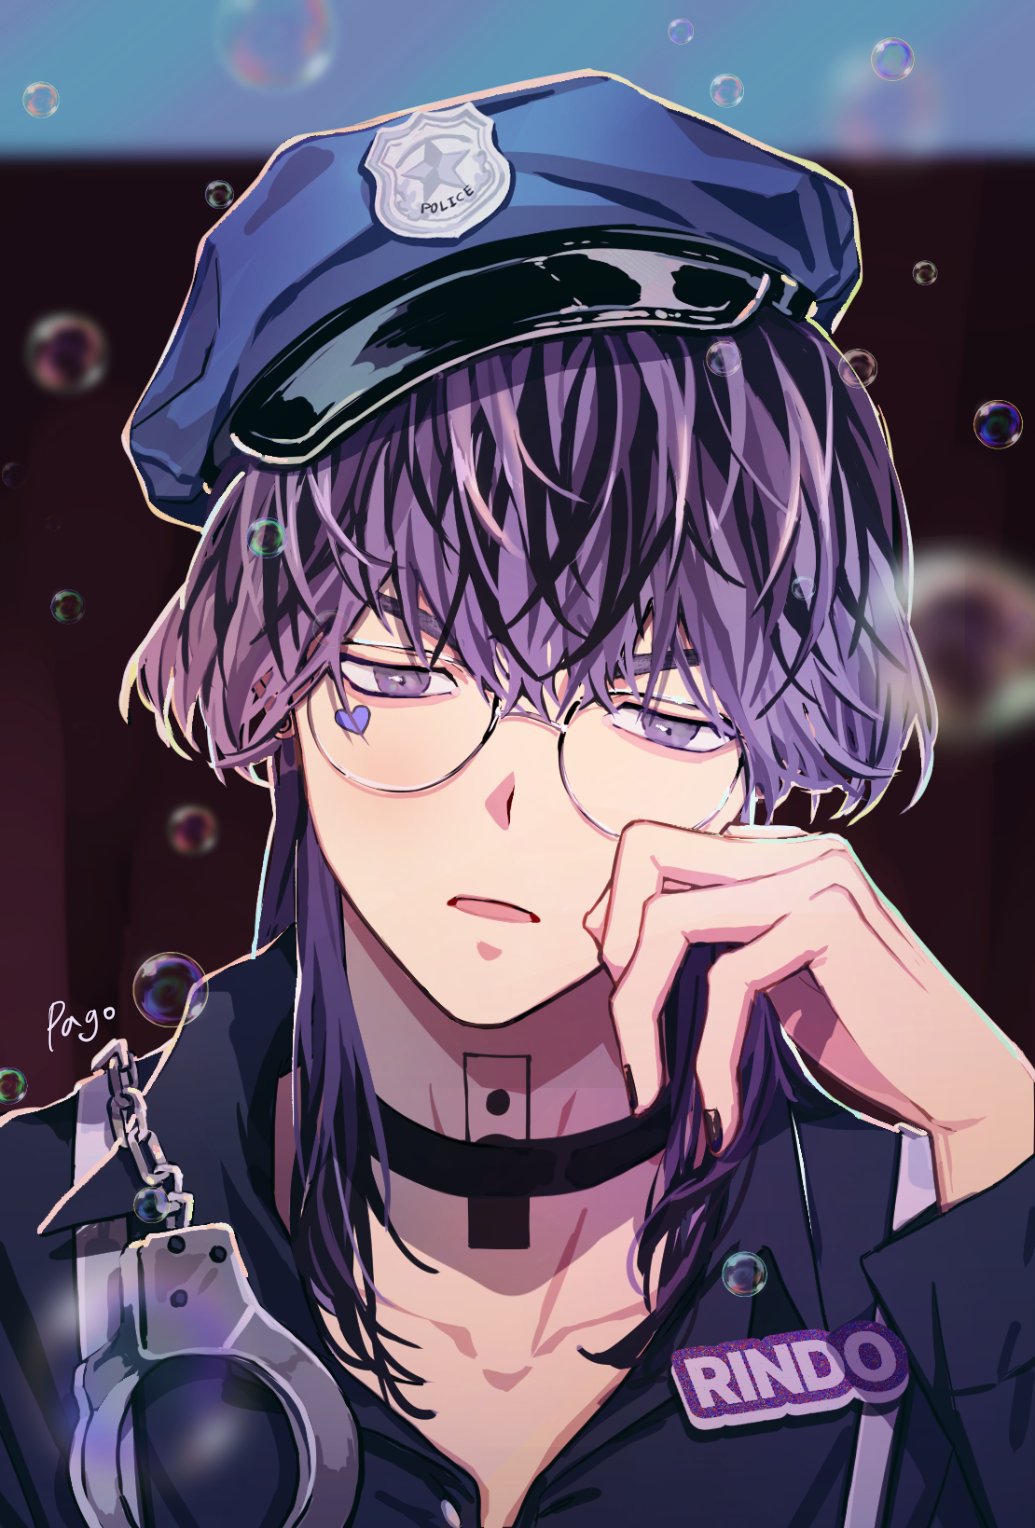 1boy black_choker bubble choker cuffs glasses haitani_rindou hand_up handcuffs hat highres idol looking_at_viewer male_focus multicolored_hair name_tag neck_tattoo pago0024 police police_hat police_uniform purple_hair sticker_on_face tattoo tokyo_revengers two-tone_hair uniform violet_eyes wolf_cut